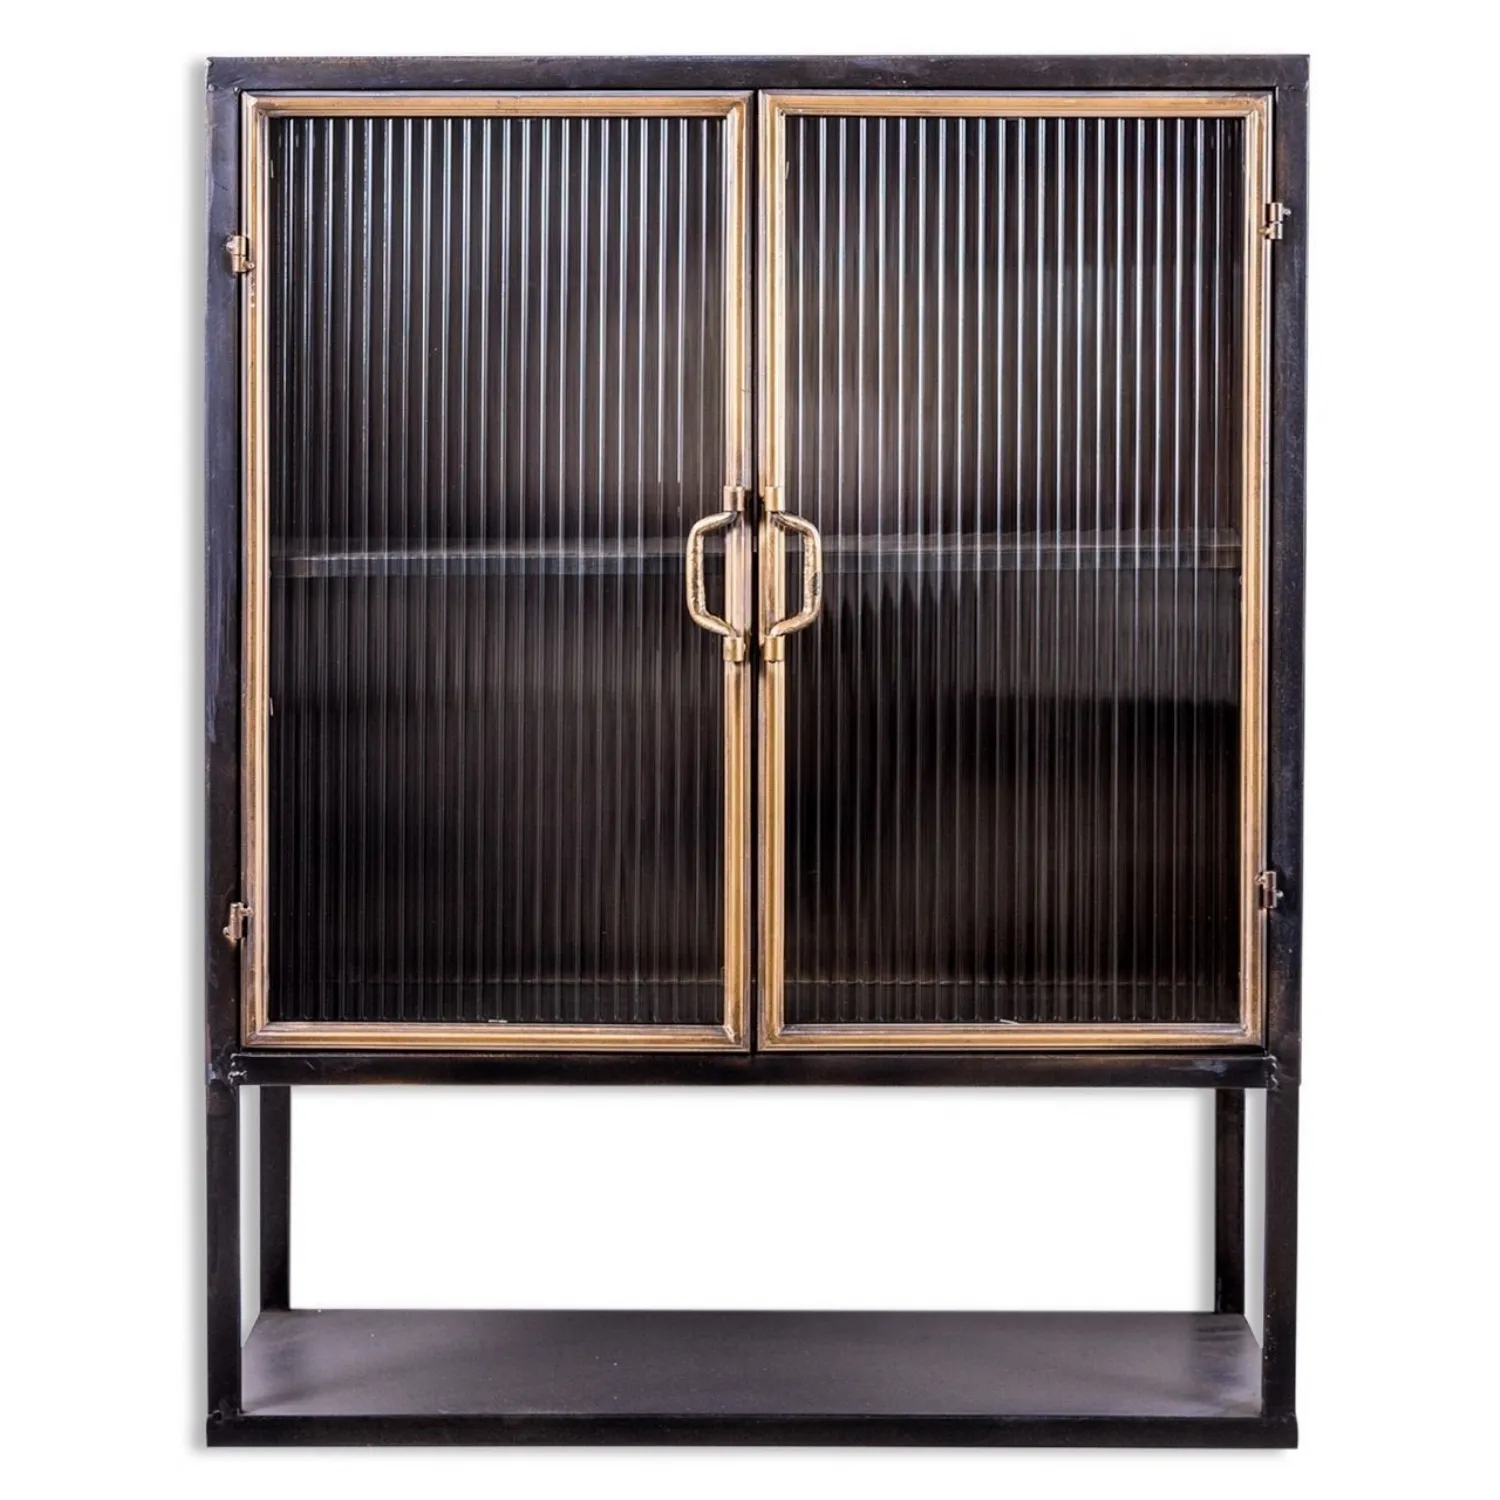 Black and Gold Wall Storage Cabinet